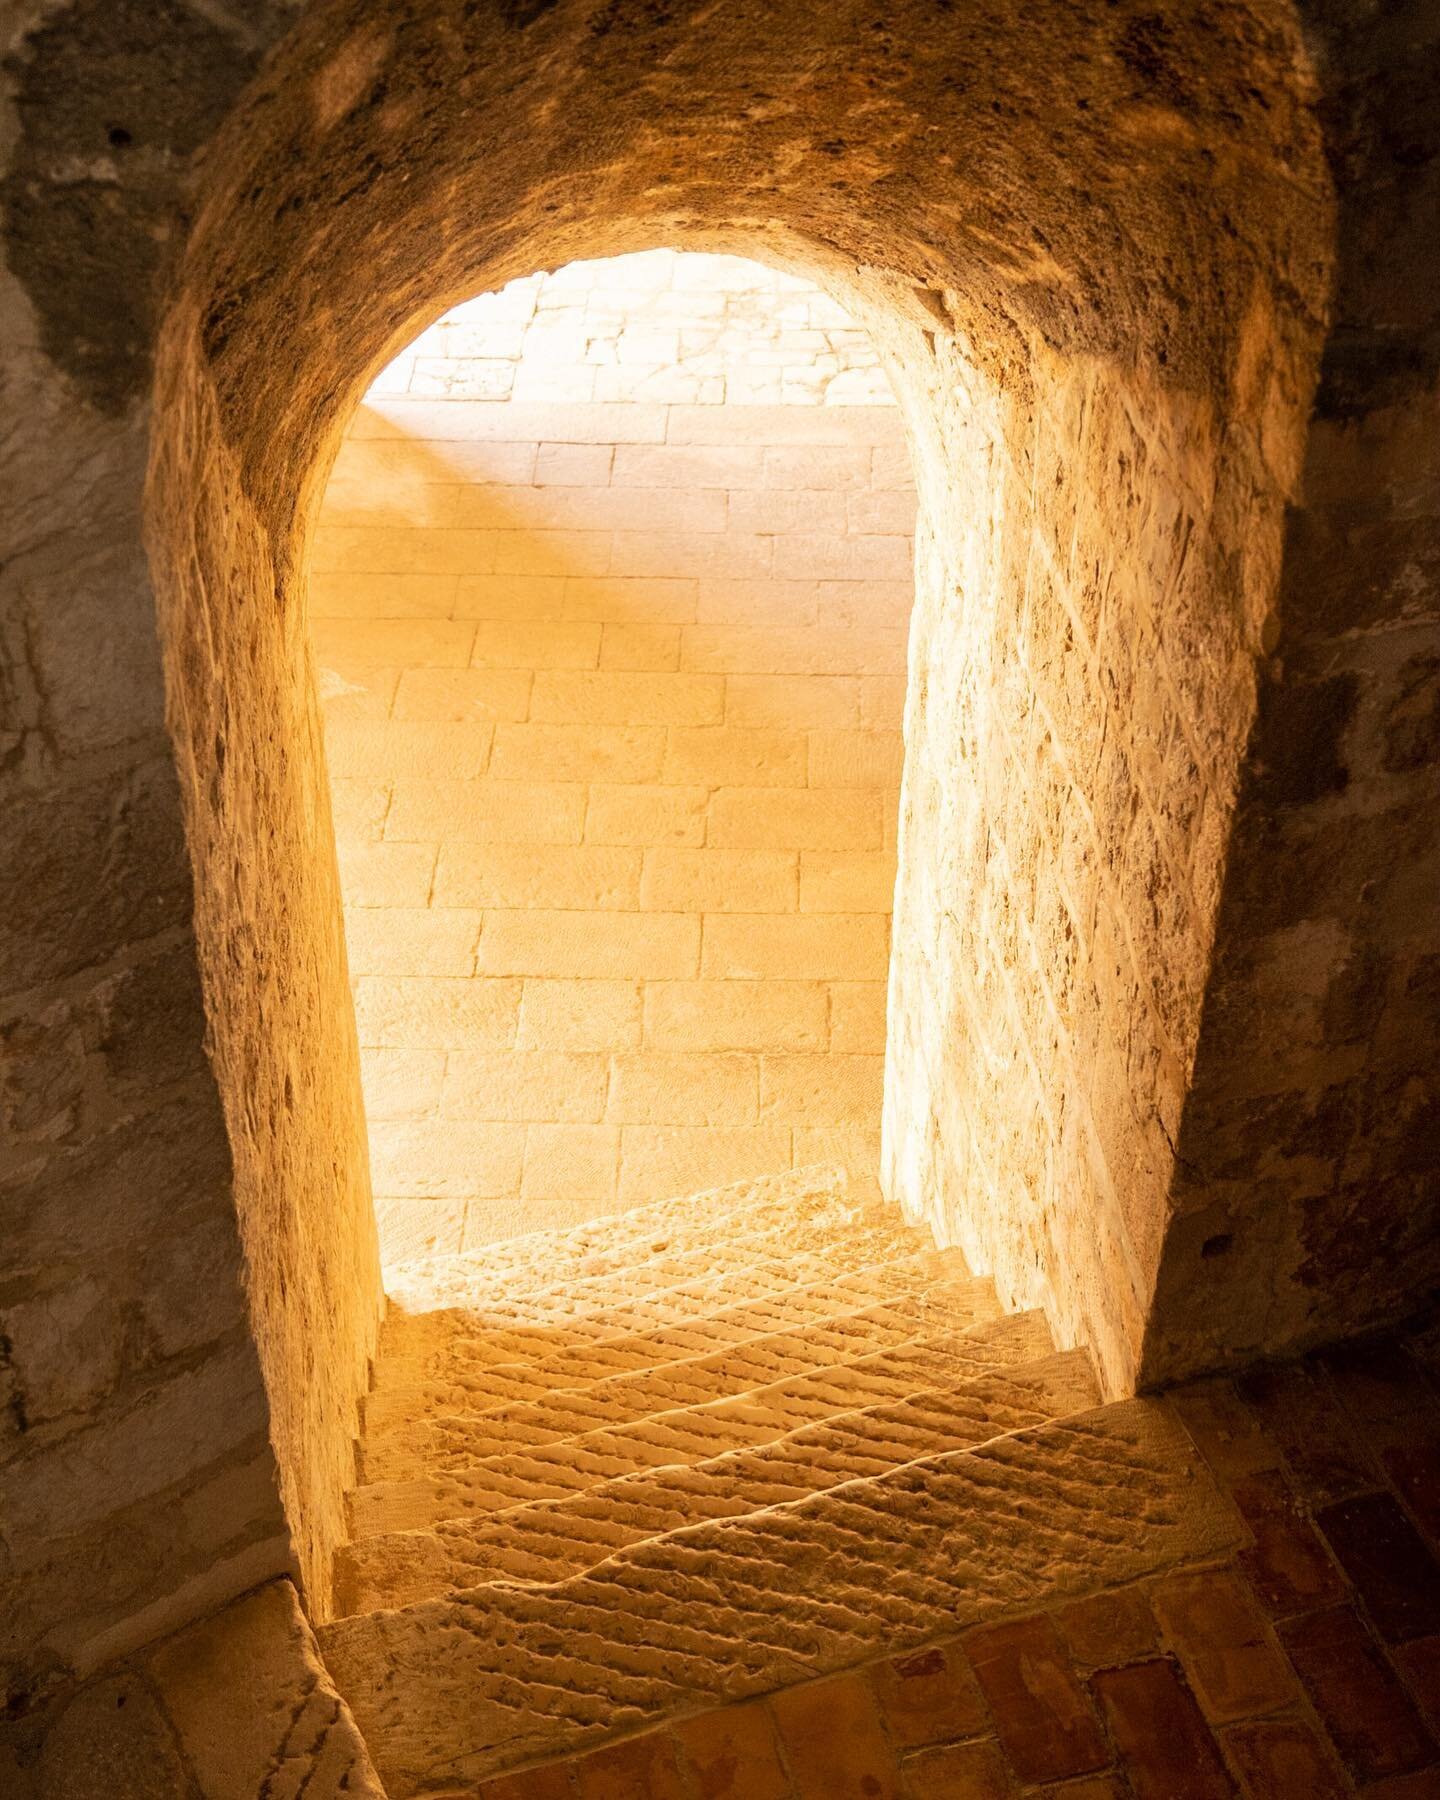 Walk into the light! 

Last winter I spent a fair bit of time exploring Roman forts along the Croatia coast. There are hundreds of them scattered all over some barely get a mention and others are Crazy money to go see. 

What truly fascinating is how